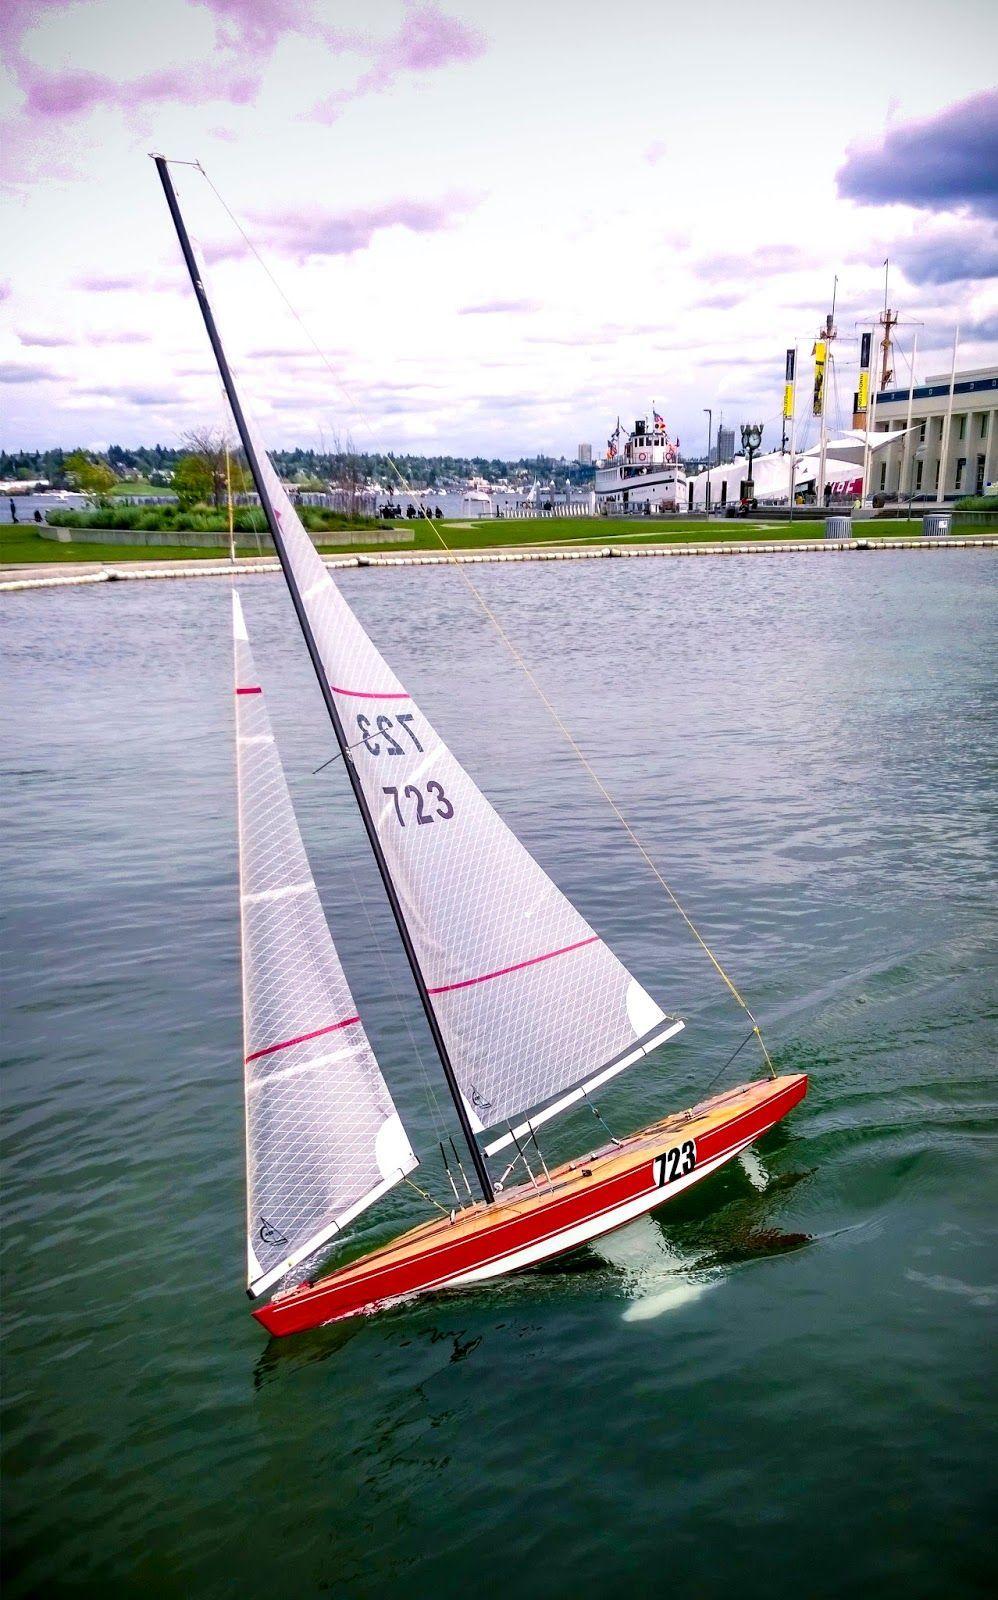 Star 45 Rc Sailboat: Top Retailers for Purchasing a Star 45 RC Sailboat